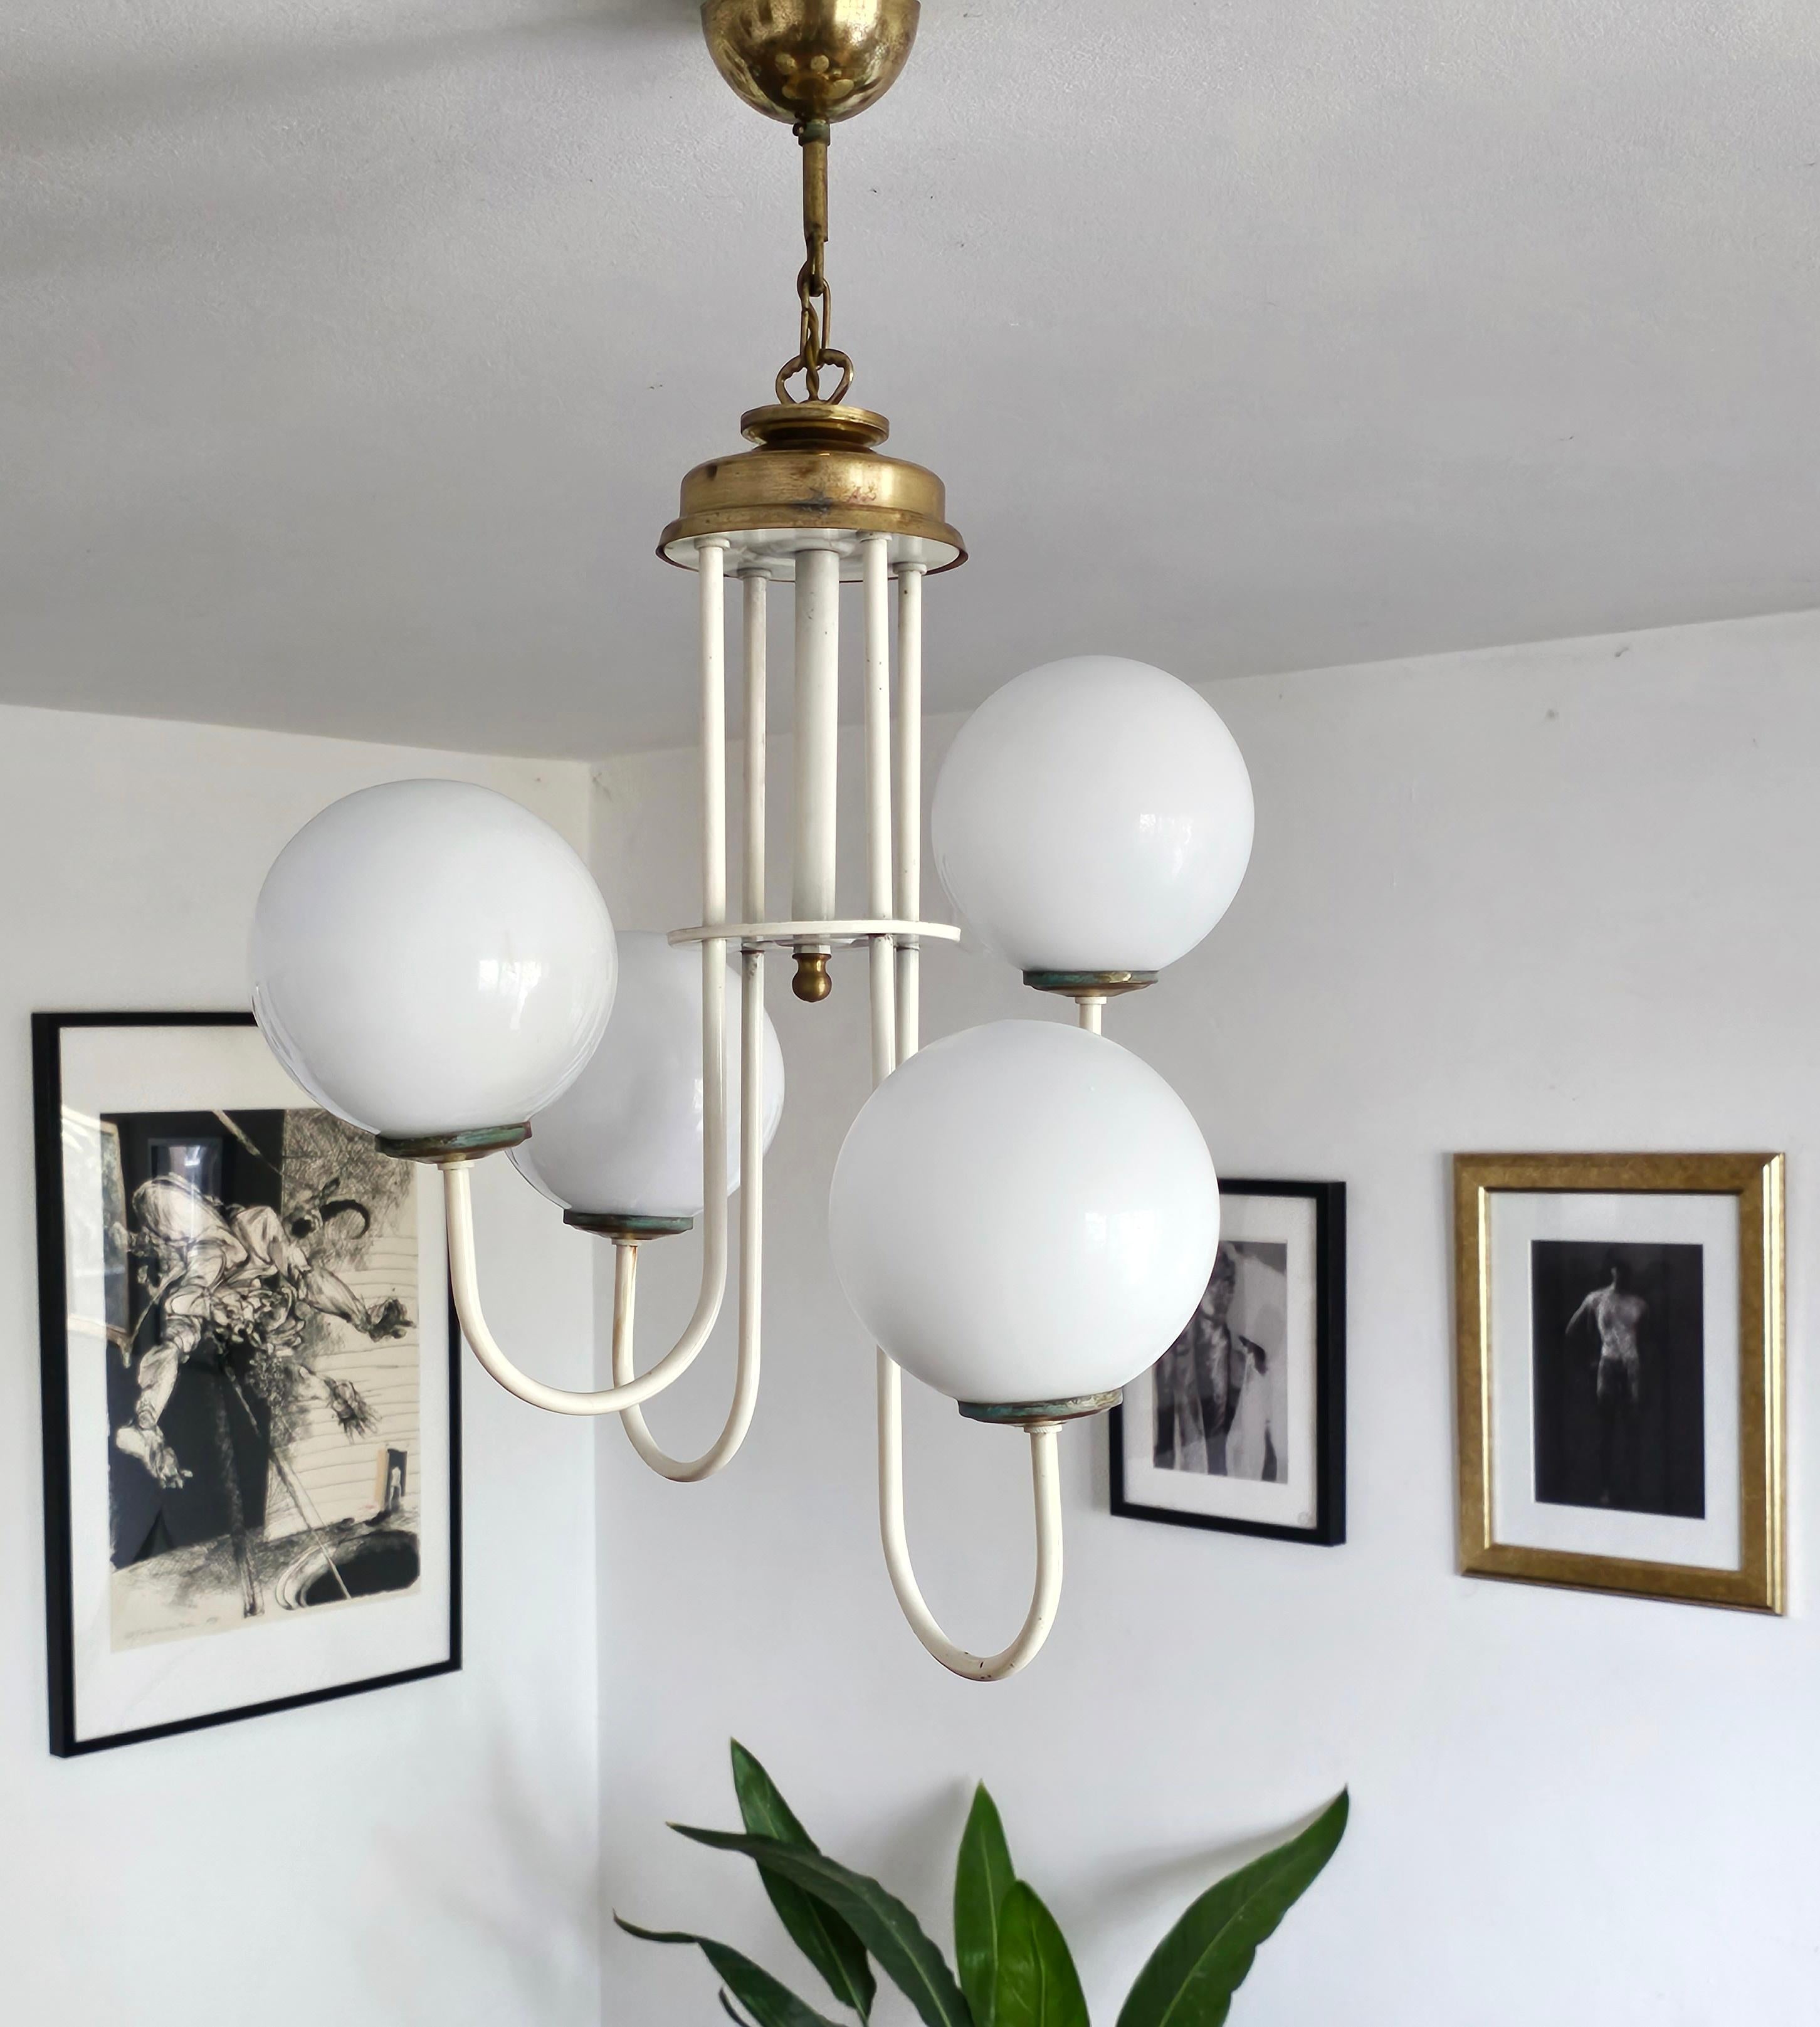 In this listing you will find a beautiful and elegant Mid Century Modern Chandelier done in white painted steel, with 4 opaline glass balls. Simple, yet beautiful design will stand out in any space this gorgeous piece is place into. Made in Italy in